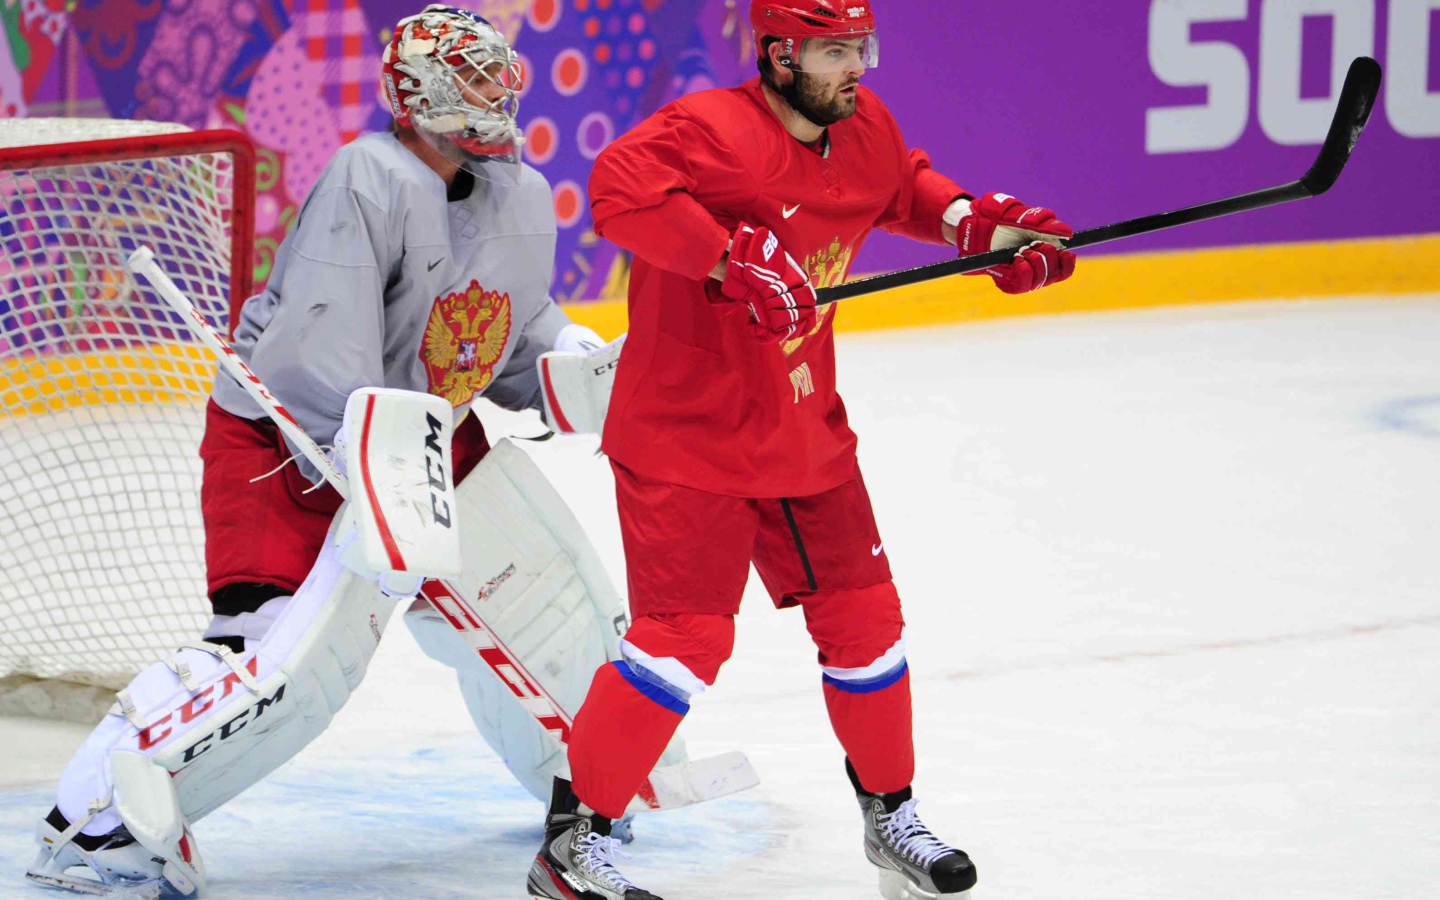 Russian hockey players at the Olympics in Sochi